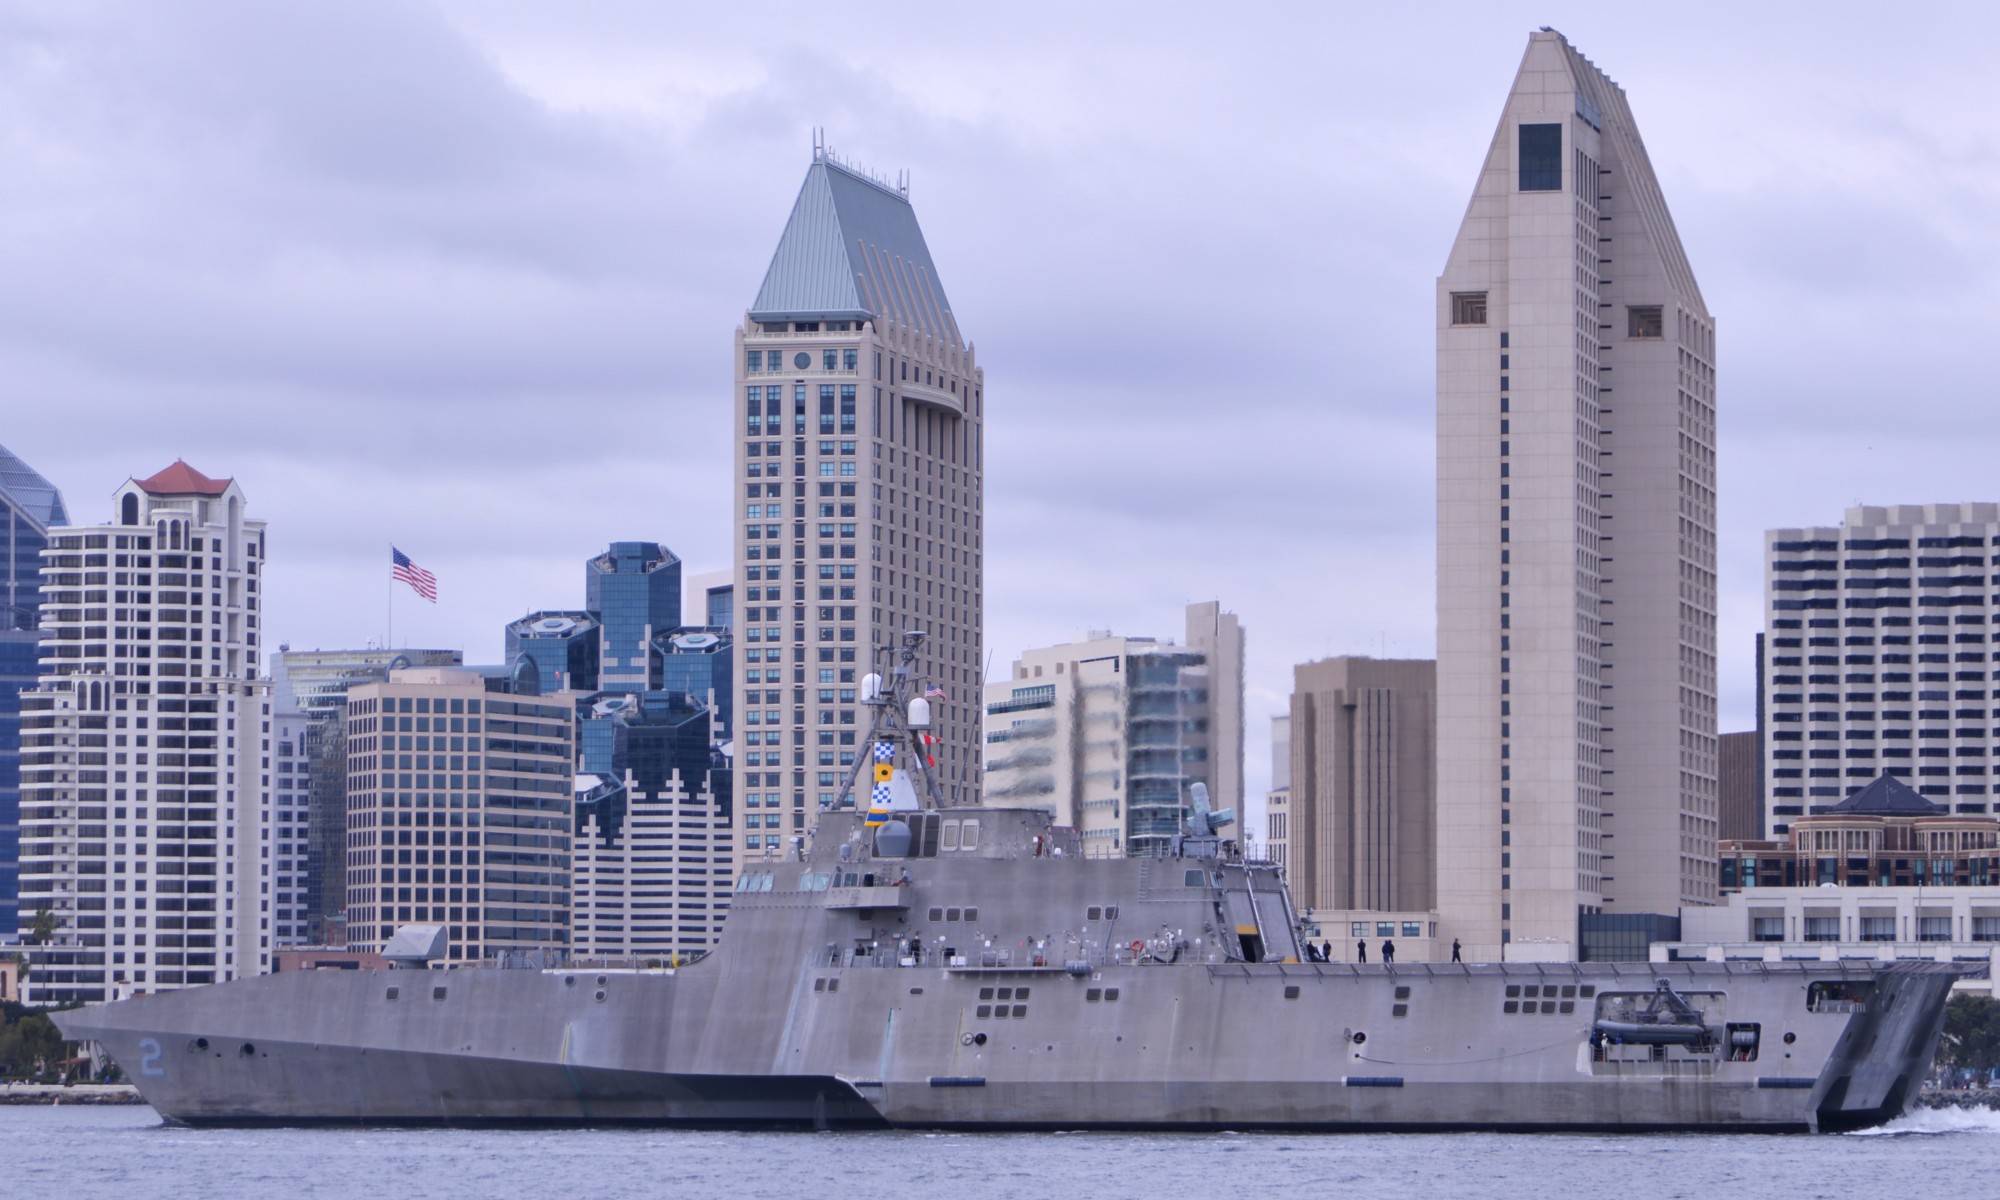 lcs-2 uss independence littoral combat ship us navy class 23 san diego